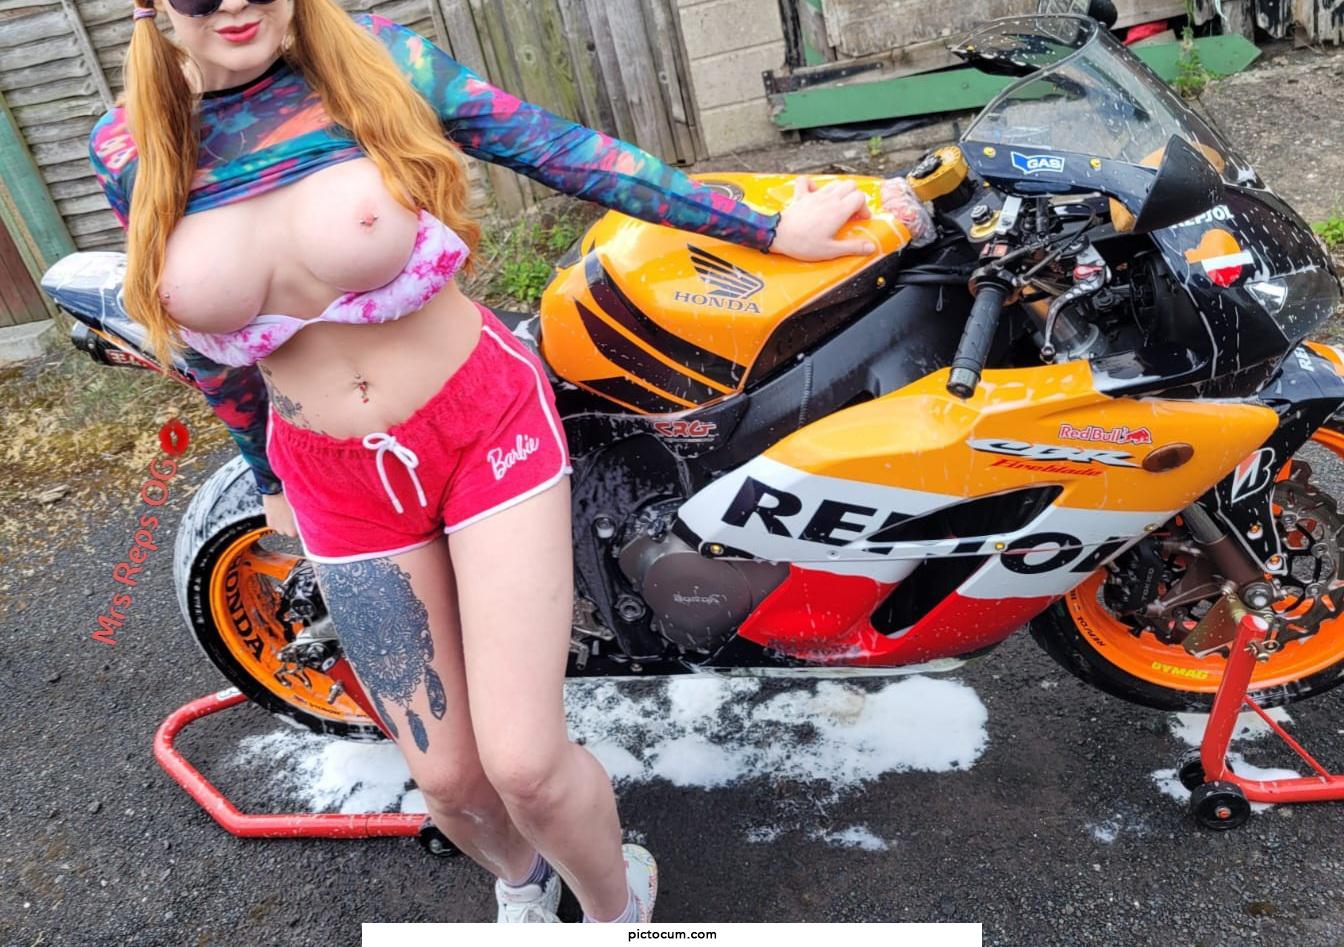 Being a good girl and washing the bike, with my tits out